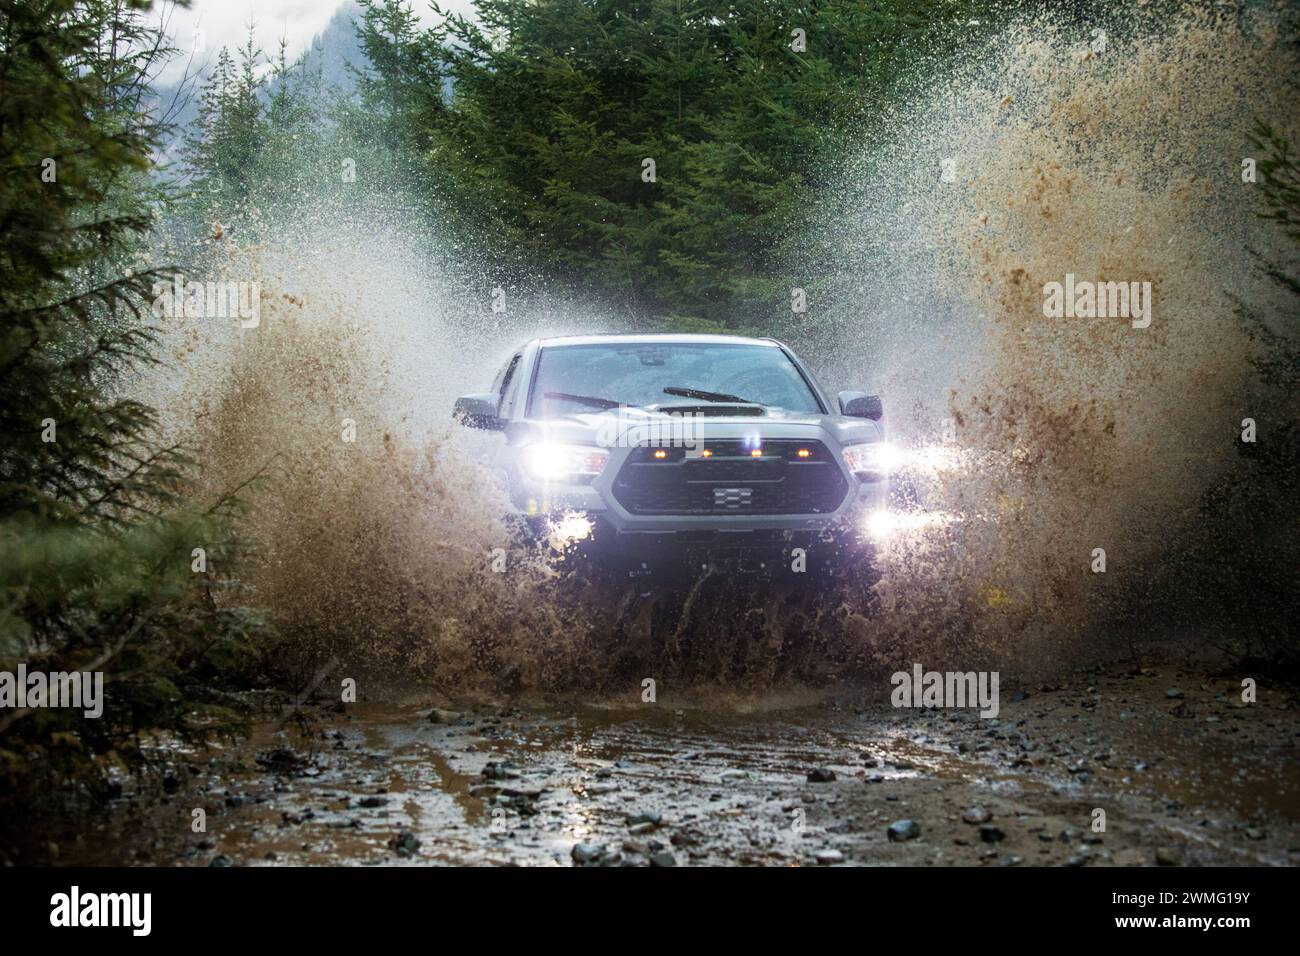 Truck with lights on powerfully drives through a flooded gravel road Stock Photo